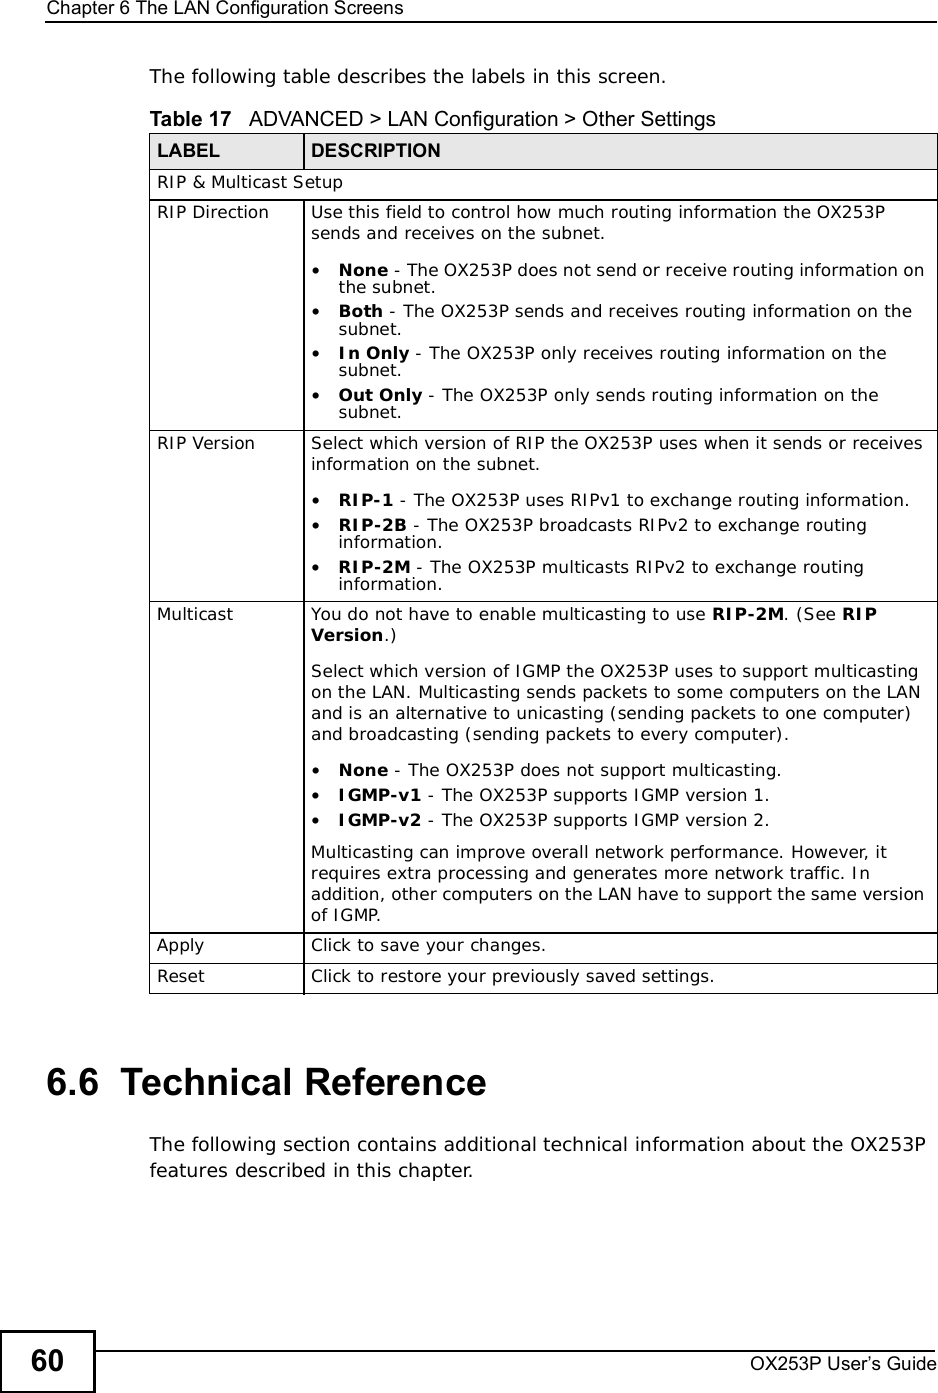 Chapter 6The LAN Configuration ScreensOX253P User’s Guide60The following table describes the labels in this screen.6.6  Technical ReferenceThe following section contains additional technical information about the OX253P features described in this chapter.Table 17   ADVANCED &gt; LAN Configuration &gt; Other SettingsLABEL DESCRIPTIONRIP &amp; Multicast SetupRIP Direction Use this field to control how much routing information the OX253P sends and receives on the subnet.•None - The OX253P does not send or receive routing information on the subnet.•Both - The OX253P sends and receives routing information on the subnet.•In Only - The OX253P only receives routing information on the subnet.•Out Only - The OX253P only sends routing information on the subnet.RIP Version Select which version of RIP the OX253P uses when it sends or receives information on the subnet.•RIP-1 - The OX253P uses RIPv1 to exchange routing information.•RIP-2B - The OX253P broadcasts RIPv2 to exchange routing information.•RIP-2M - The OX253P multicasts RIPv2 to exchange routing information.Multicast You do not have to enable multicasting to use RIP-2M. (See RIPVersion.)Select which version of IGMP the OX253P uses to support multicasting on the LAN. Multicasting sends packets to some computers on the LAN and is an alternative to unicasting (sending packets to one computer) and broadcasting (sending packets to every computer).•None - The OX253P does not support multicasting.•IGMP-v1 - The OX253P supports IGMP version 1.•IGMP-v2 - The OX253P supports IGMP version 2.Multicasting can improve overall network performance. However, it requires extra processing and generates more network traffic. In addition, other computers on the LAN have to support the same version of IGMP.Apply Click to save your changes.Reset Click to restore your previously saved settings.